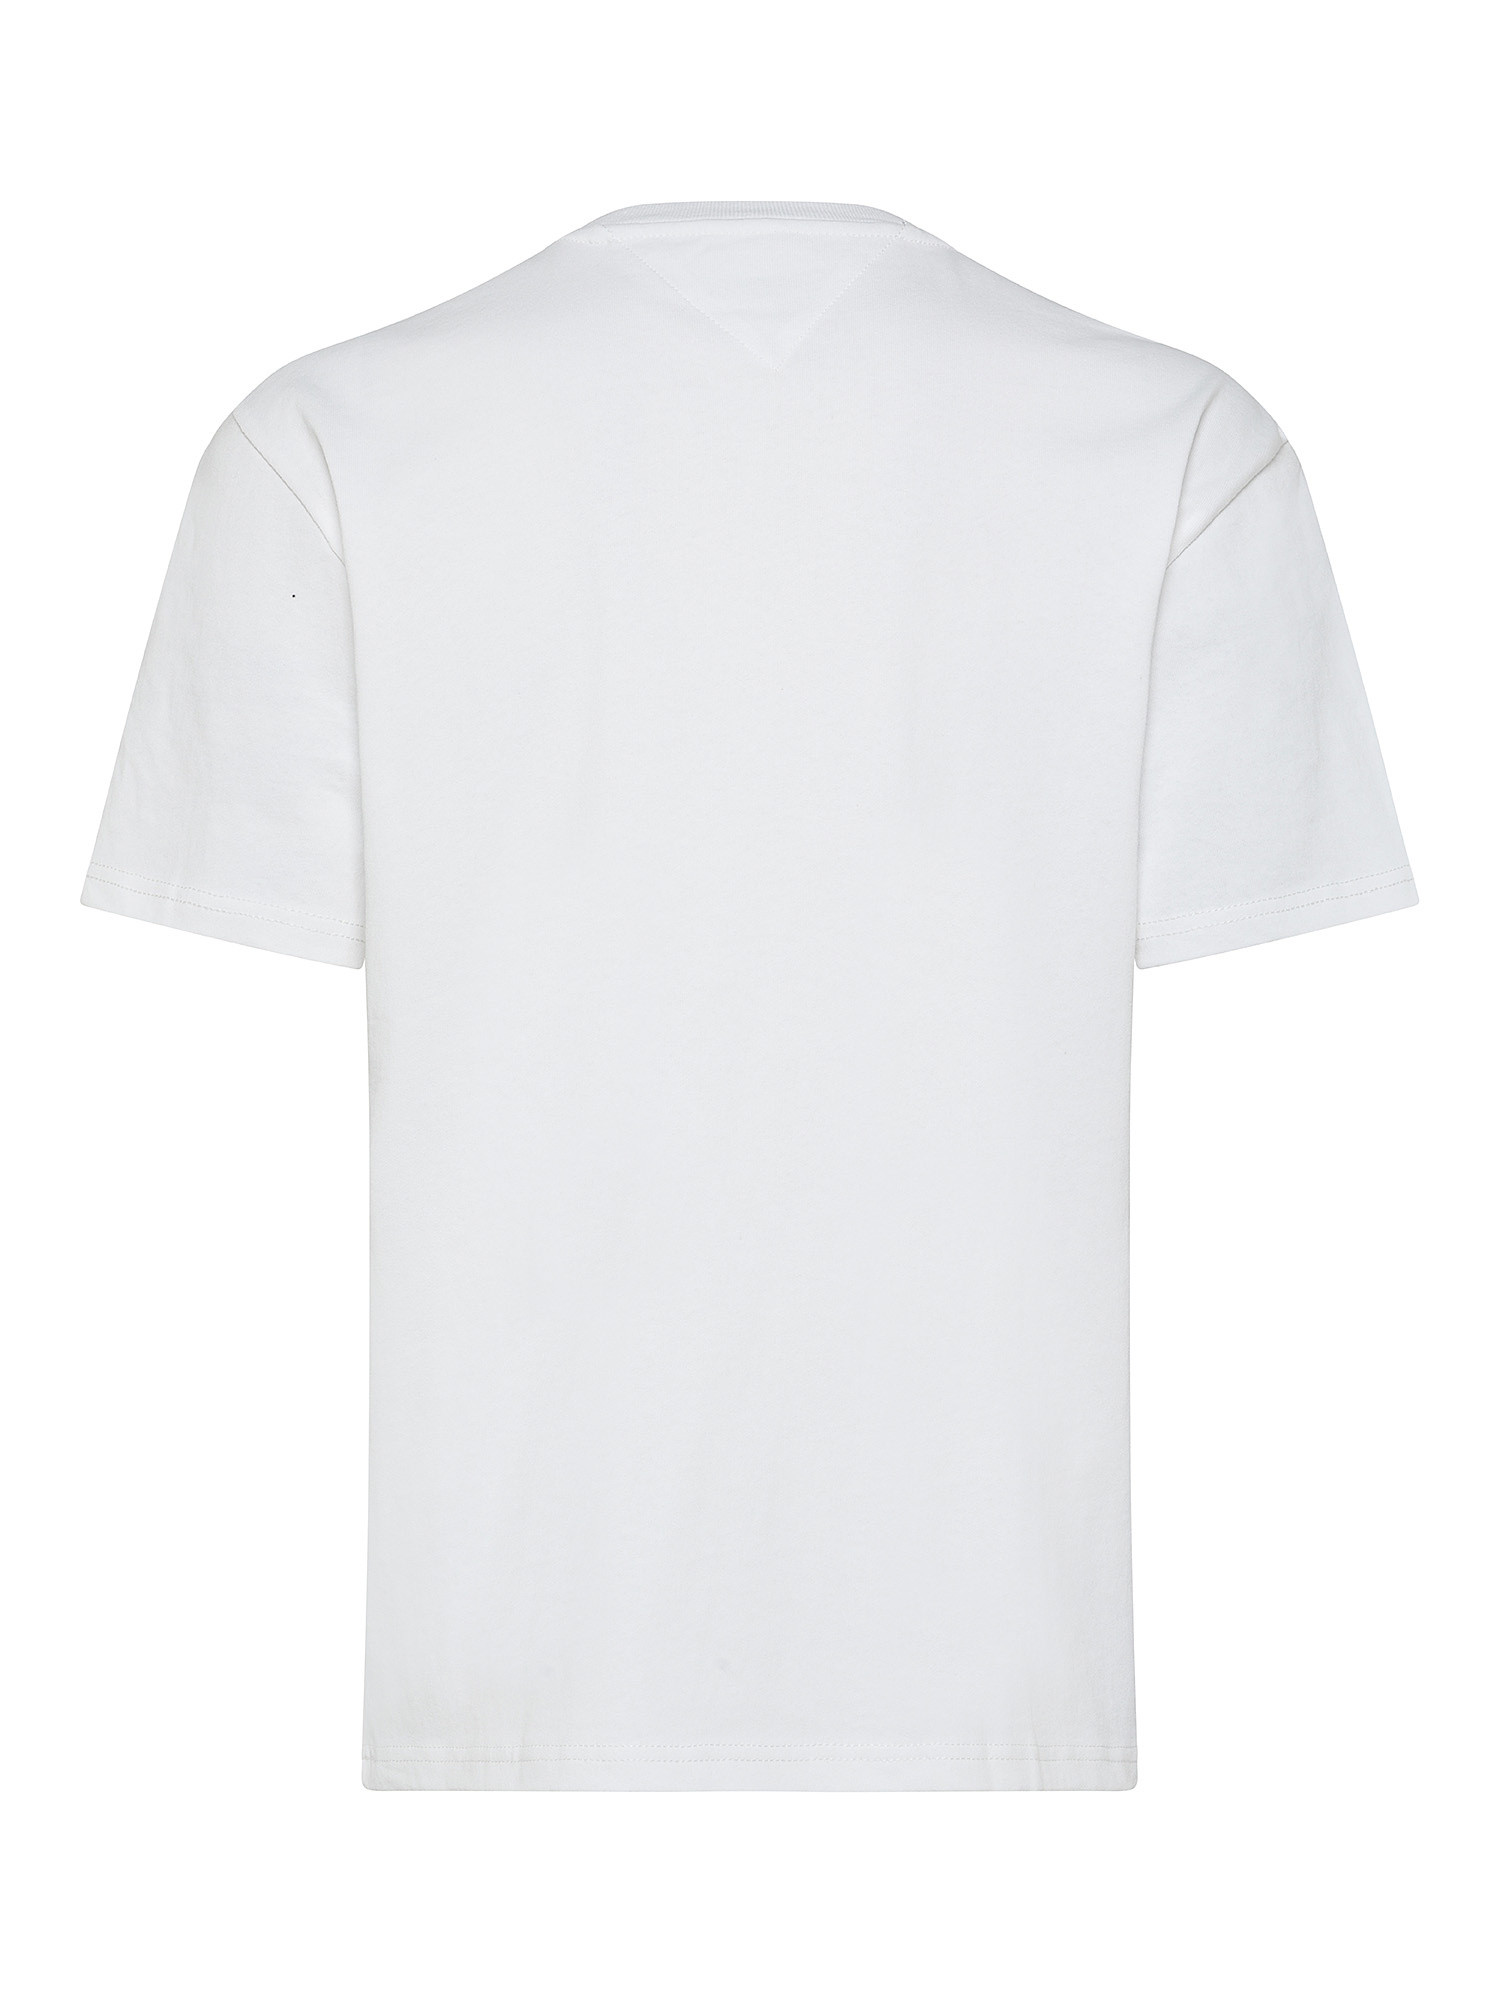 Tommy Jeans - T-shirt girocollo in cotone con micrologo, Bianco, large image number 1